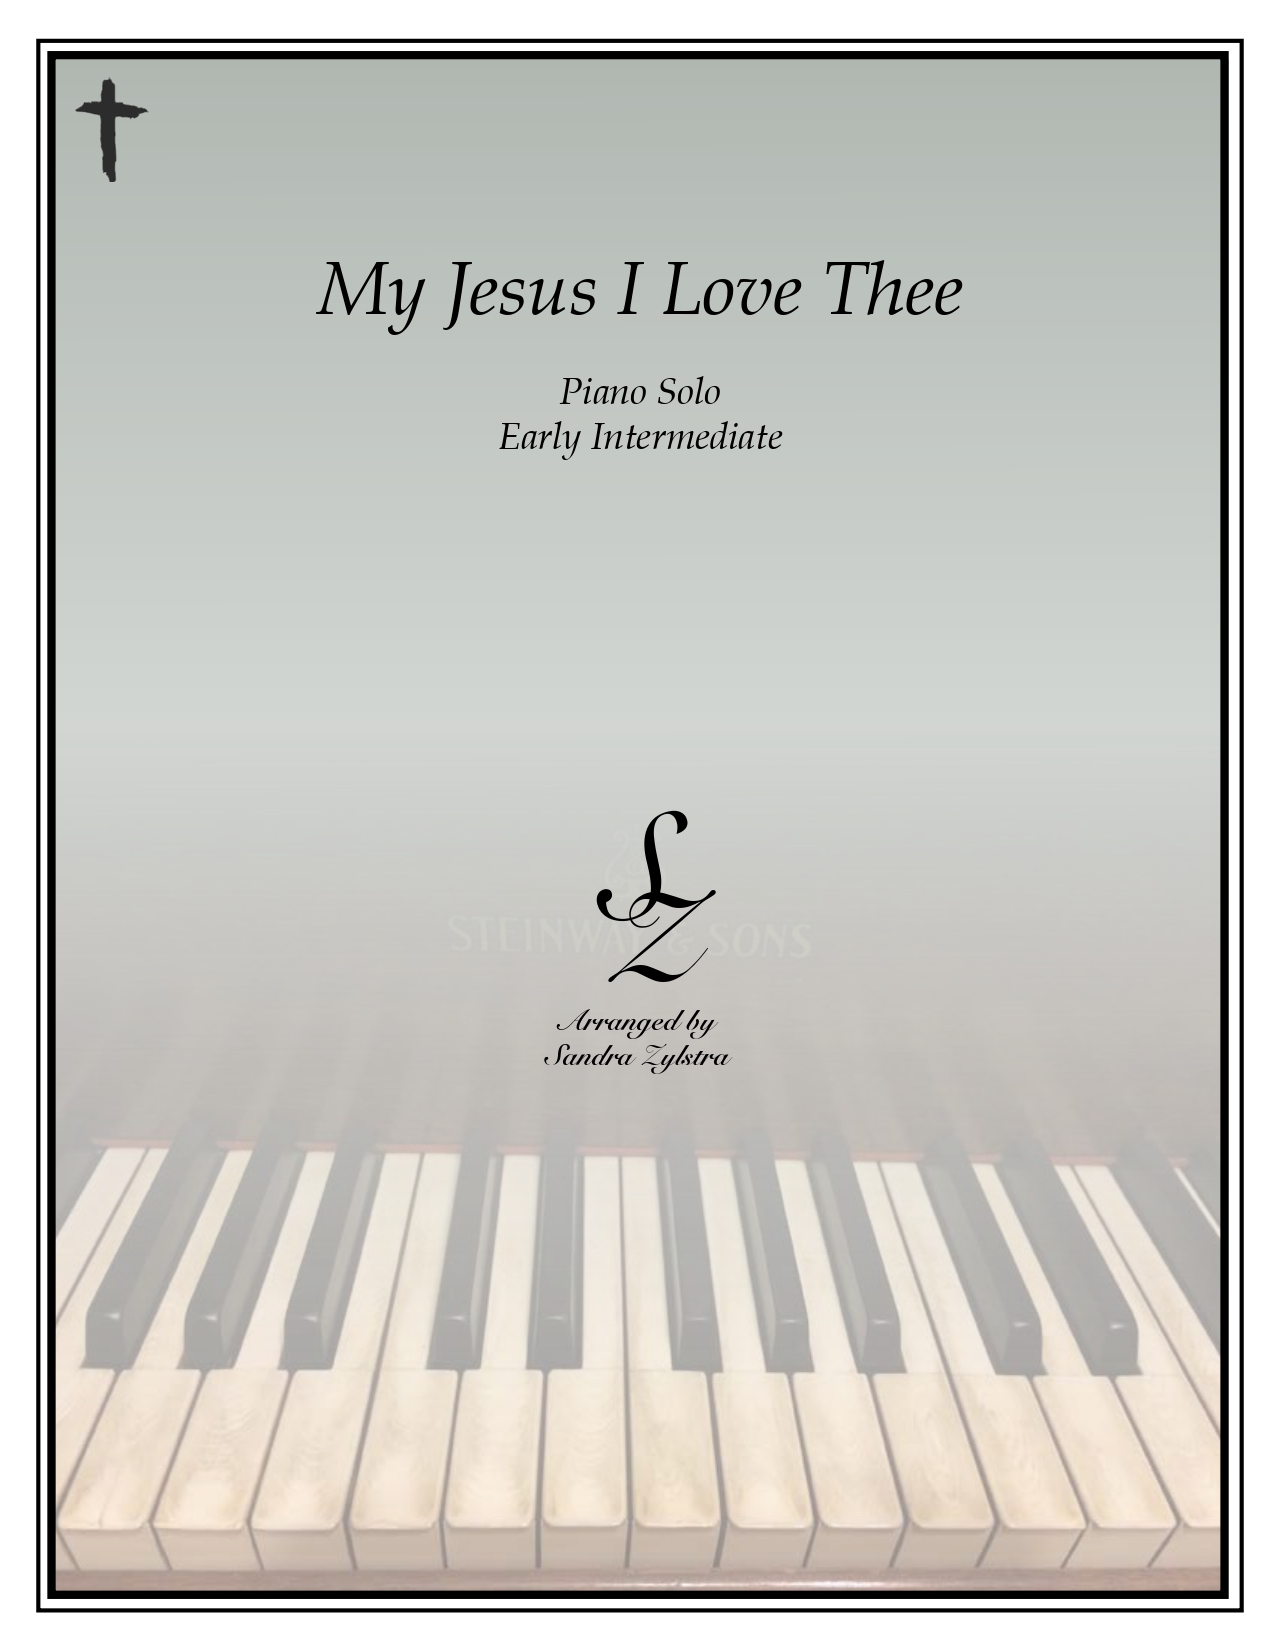 My Jesus I Love Thee early intermediate piano cover page 00011